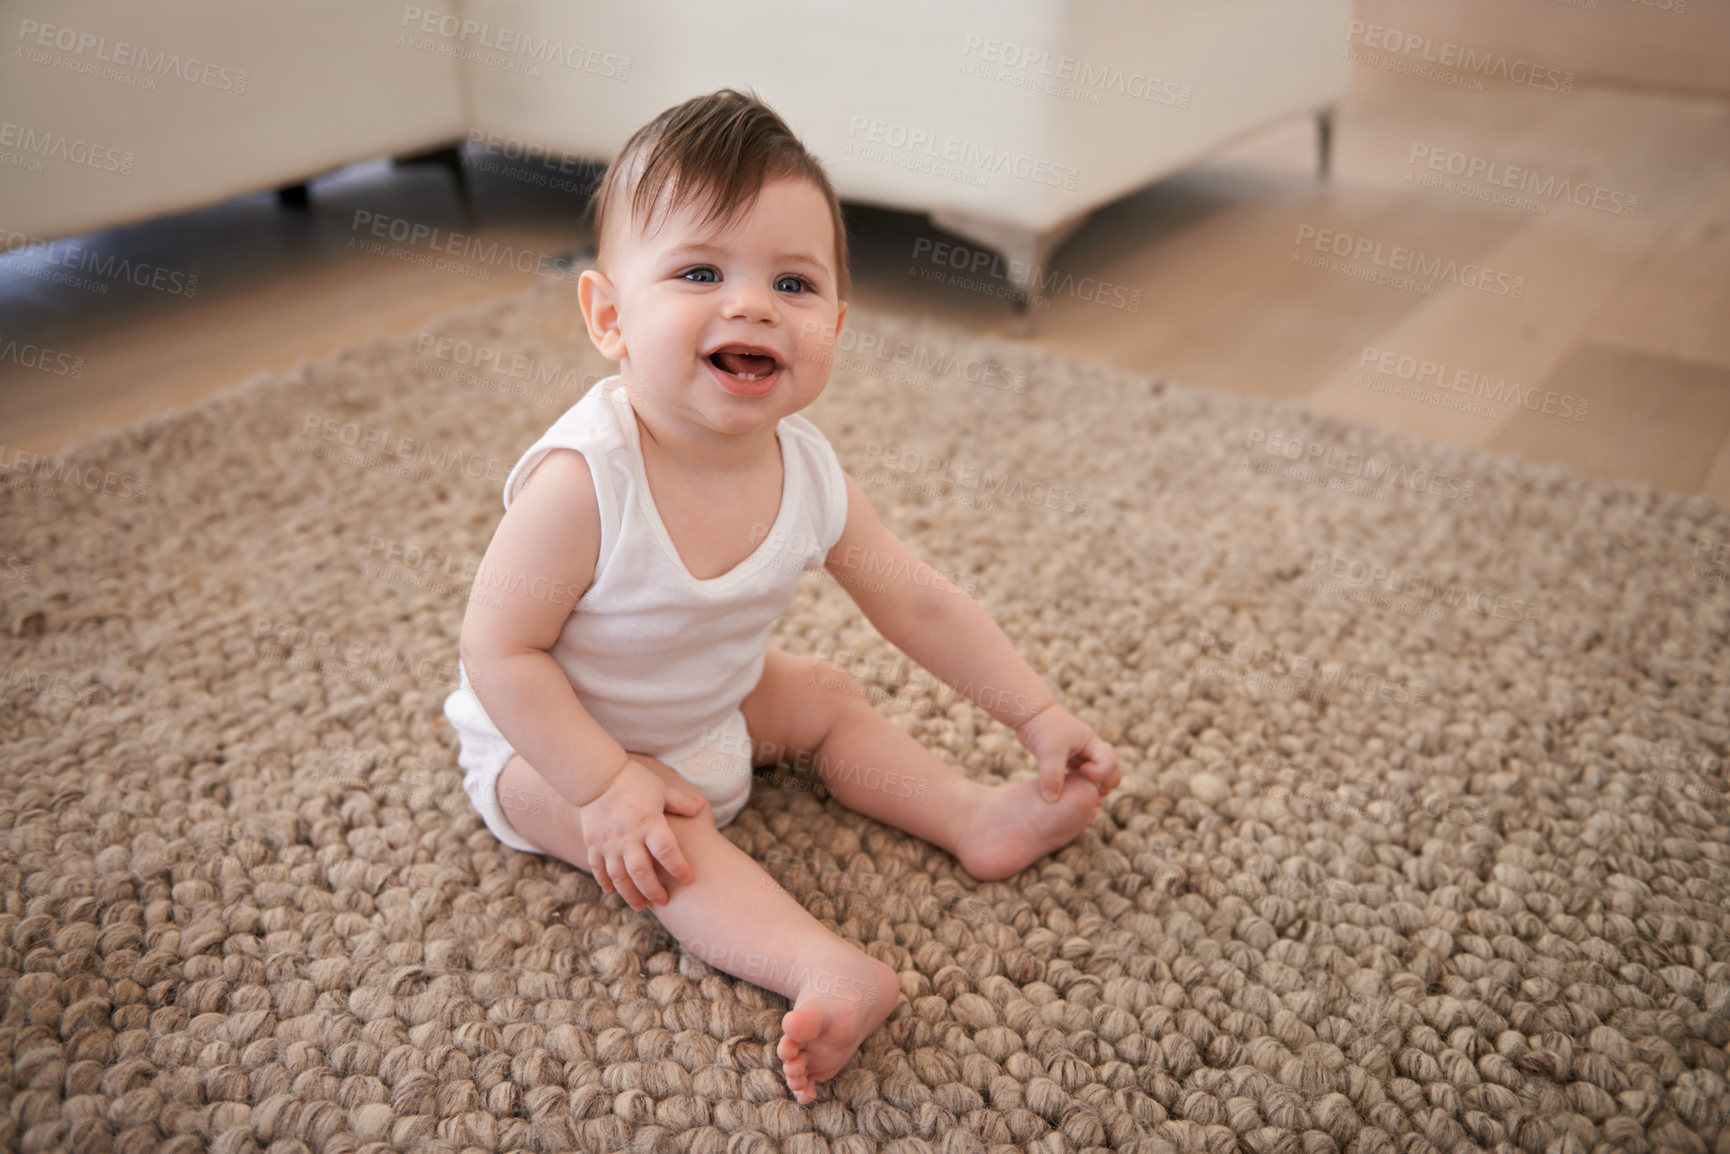 Buy stock photo Happy, sweet and baby on carpet playing for child development in living room at house. Smile, cute and adorable young infant, toddler or kid sitting on floor rug for growth in lounge of modern home.